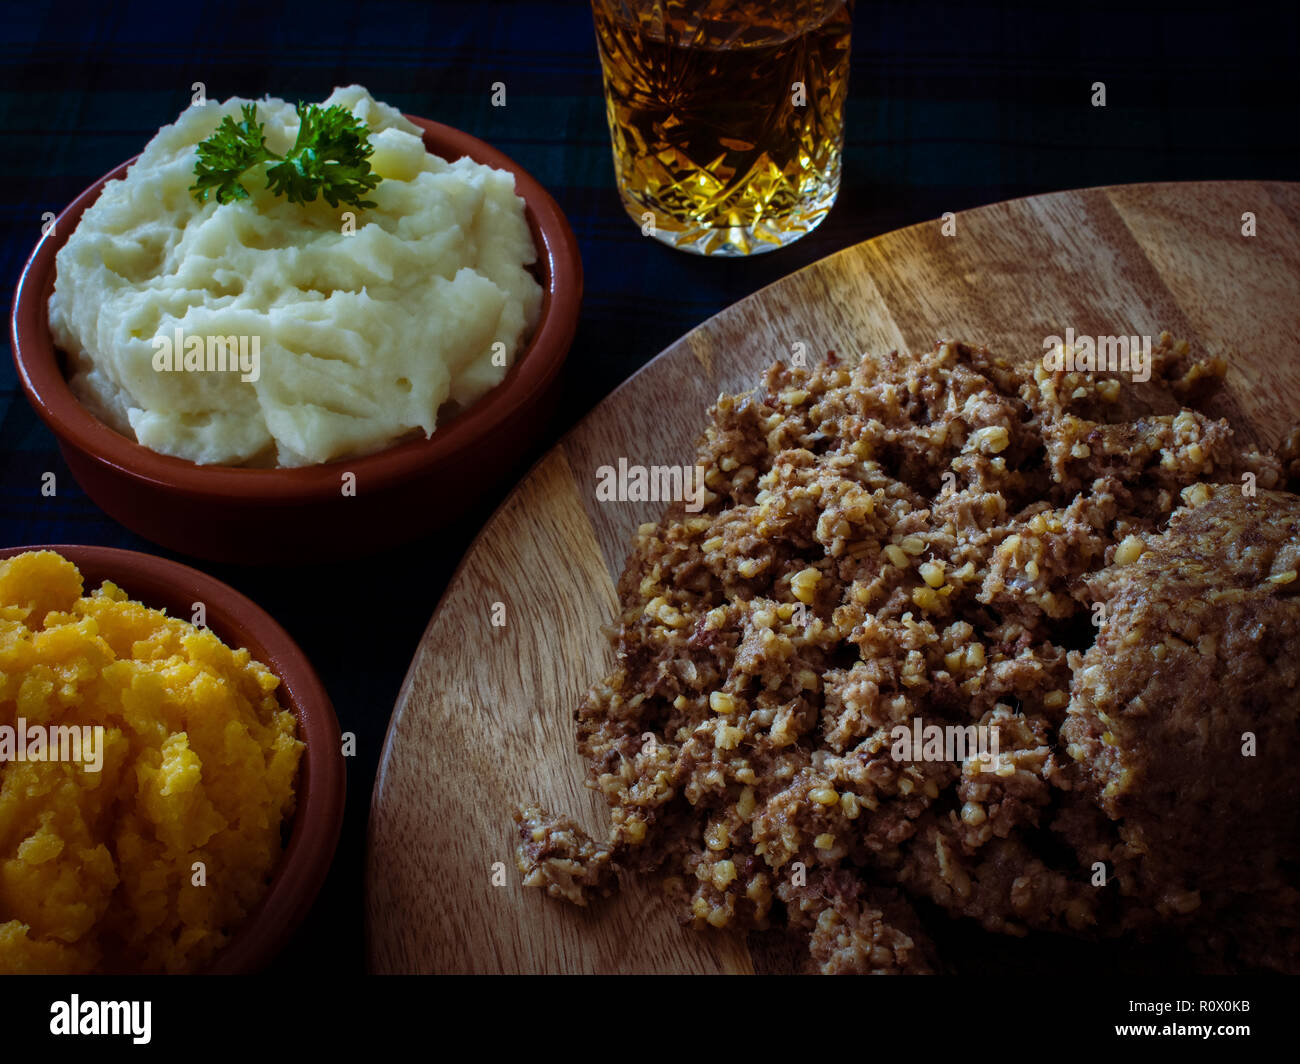 Haggis, with mashed potatoes, mashed swede and a wee dram of Scotch whisky. Burns Night, Scotland Stock Photo